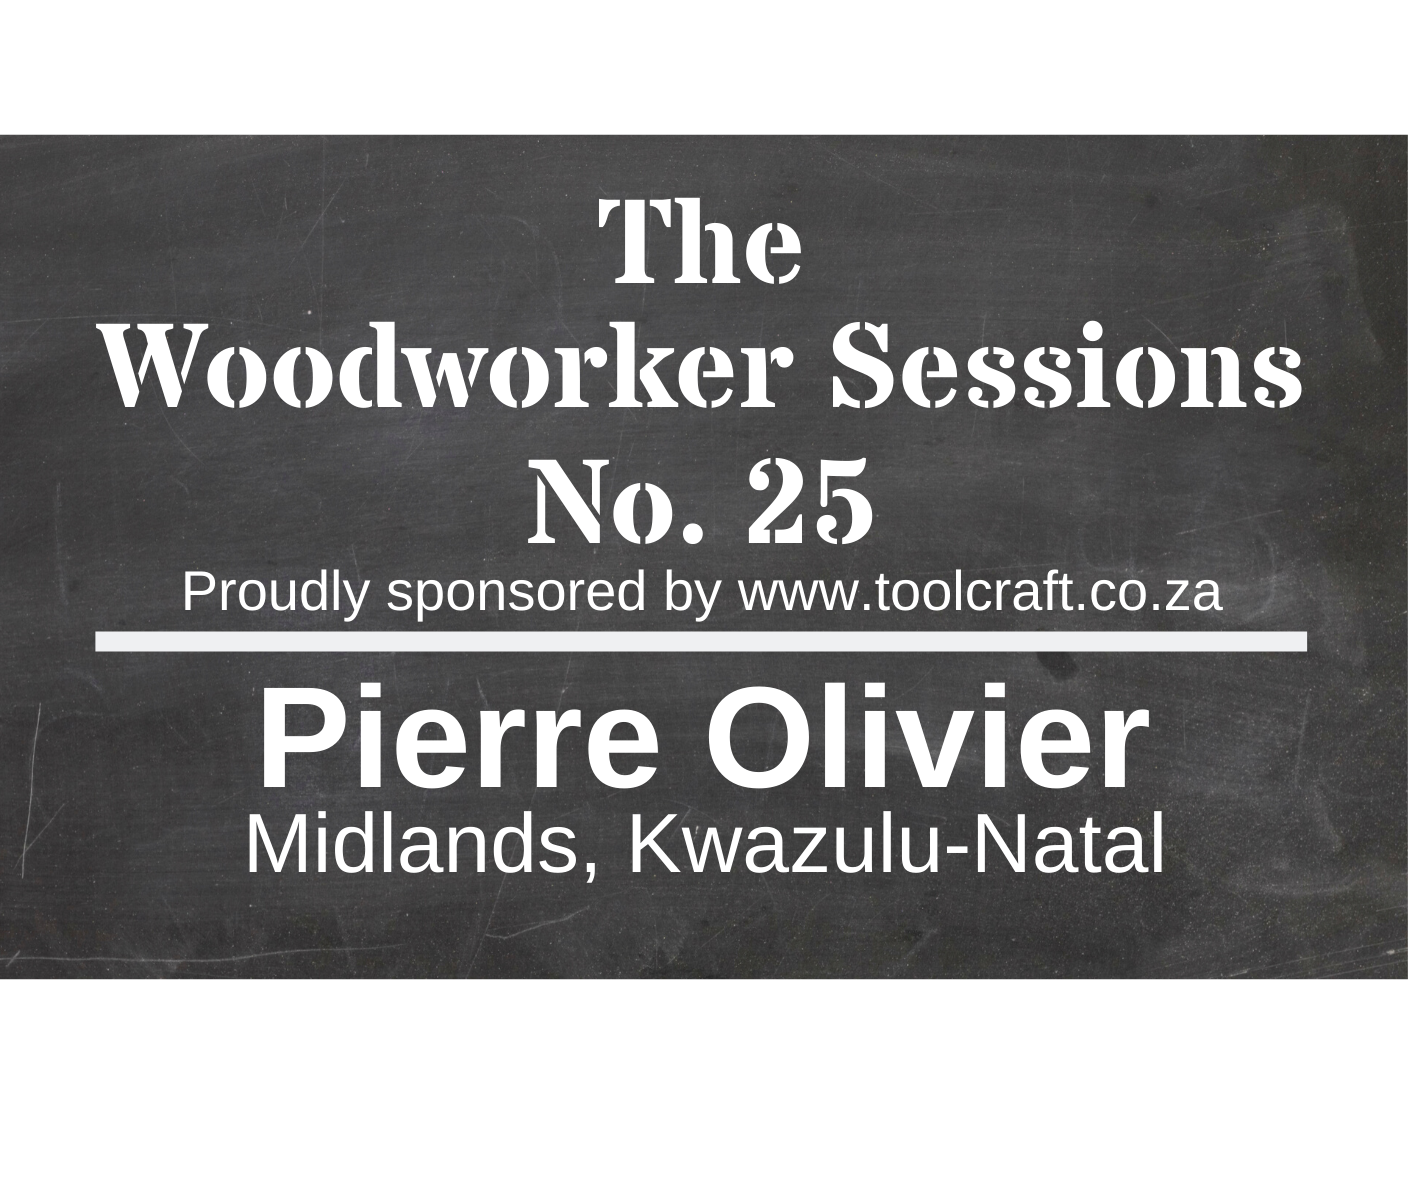 The Woodworker Sessions No.25 - Ten Questions with Pierre Olivier of Kwazulu-Natal